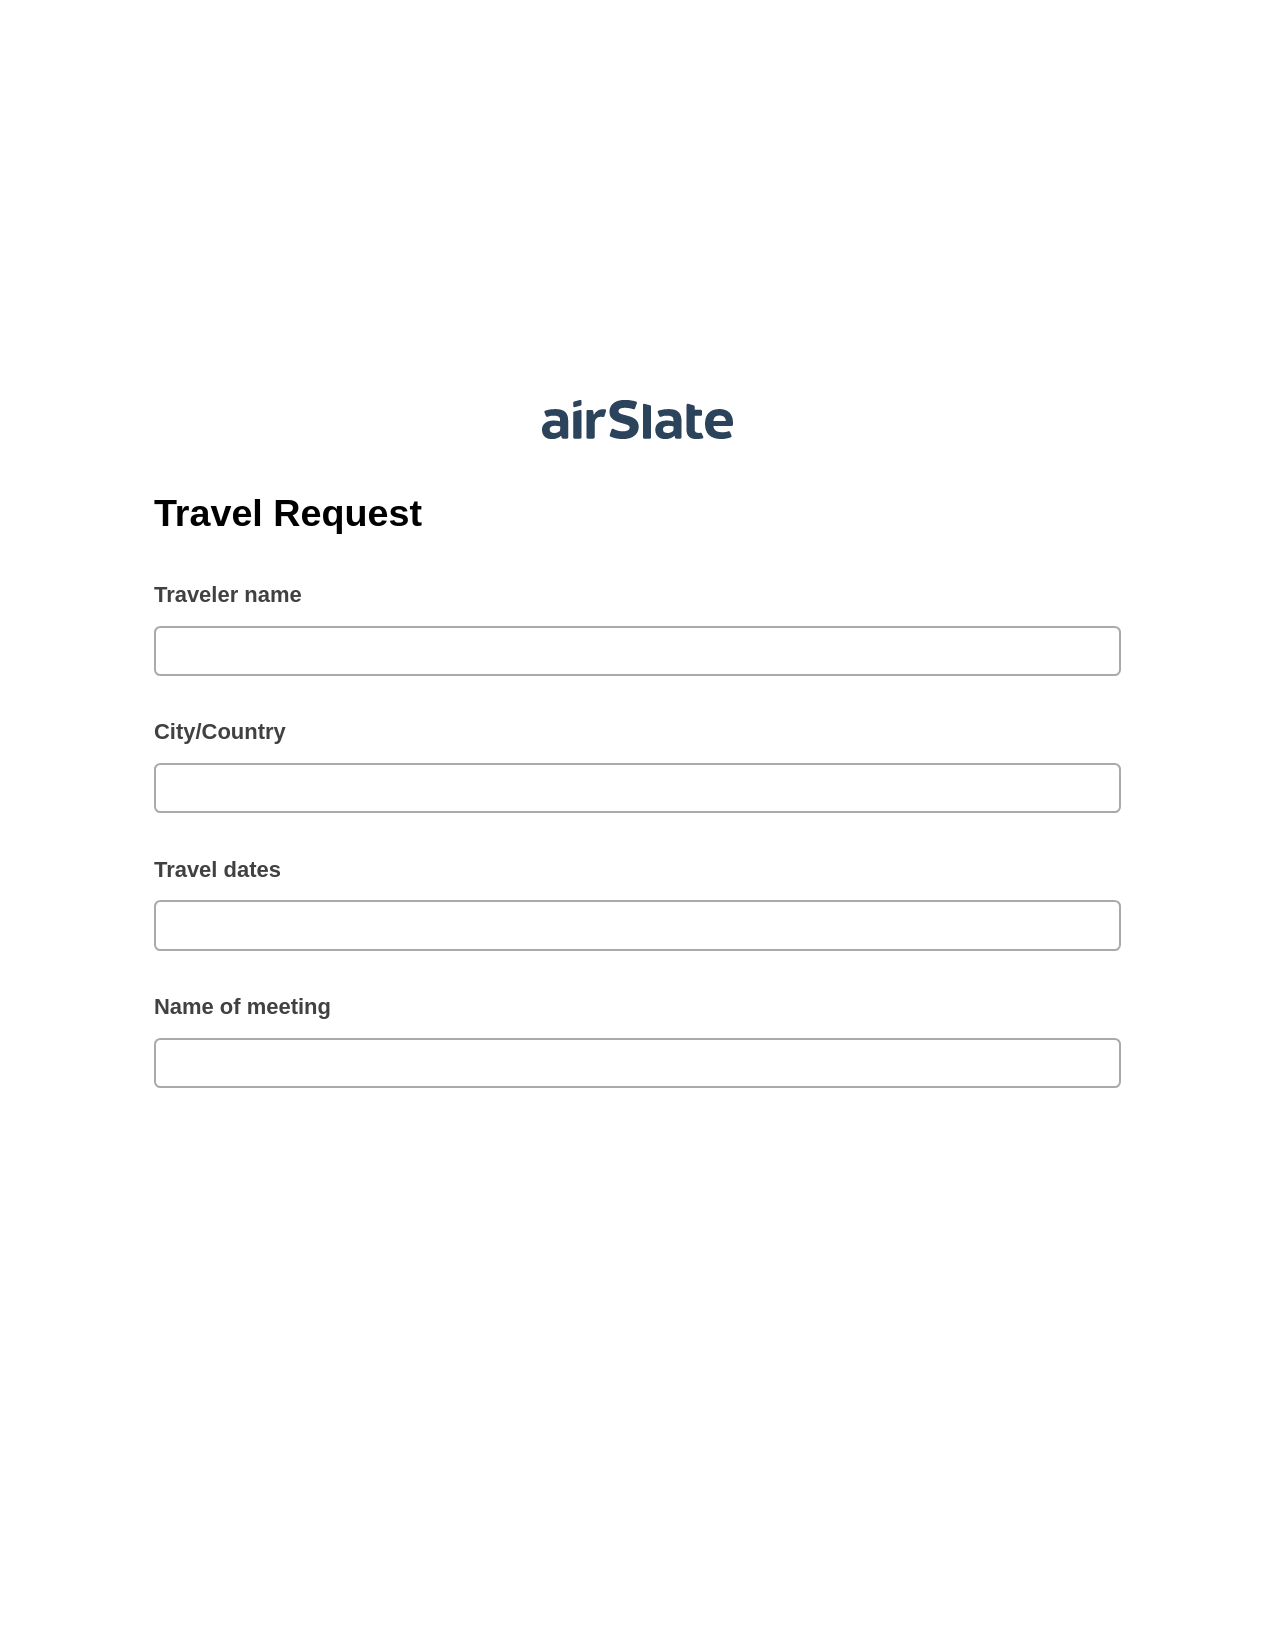 Travel Request Pre-fill Dropdowns from CSV File Bot, Unassign Role Bot, Export to Salesforce Bot